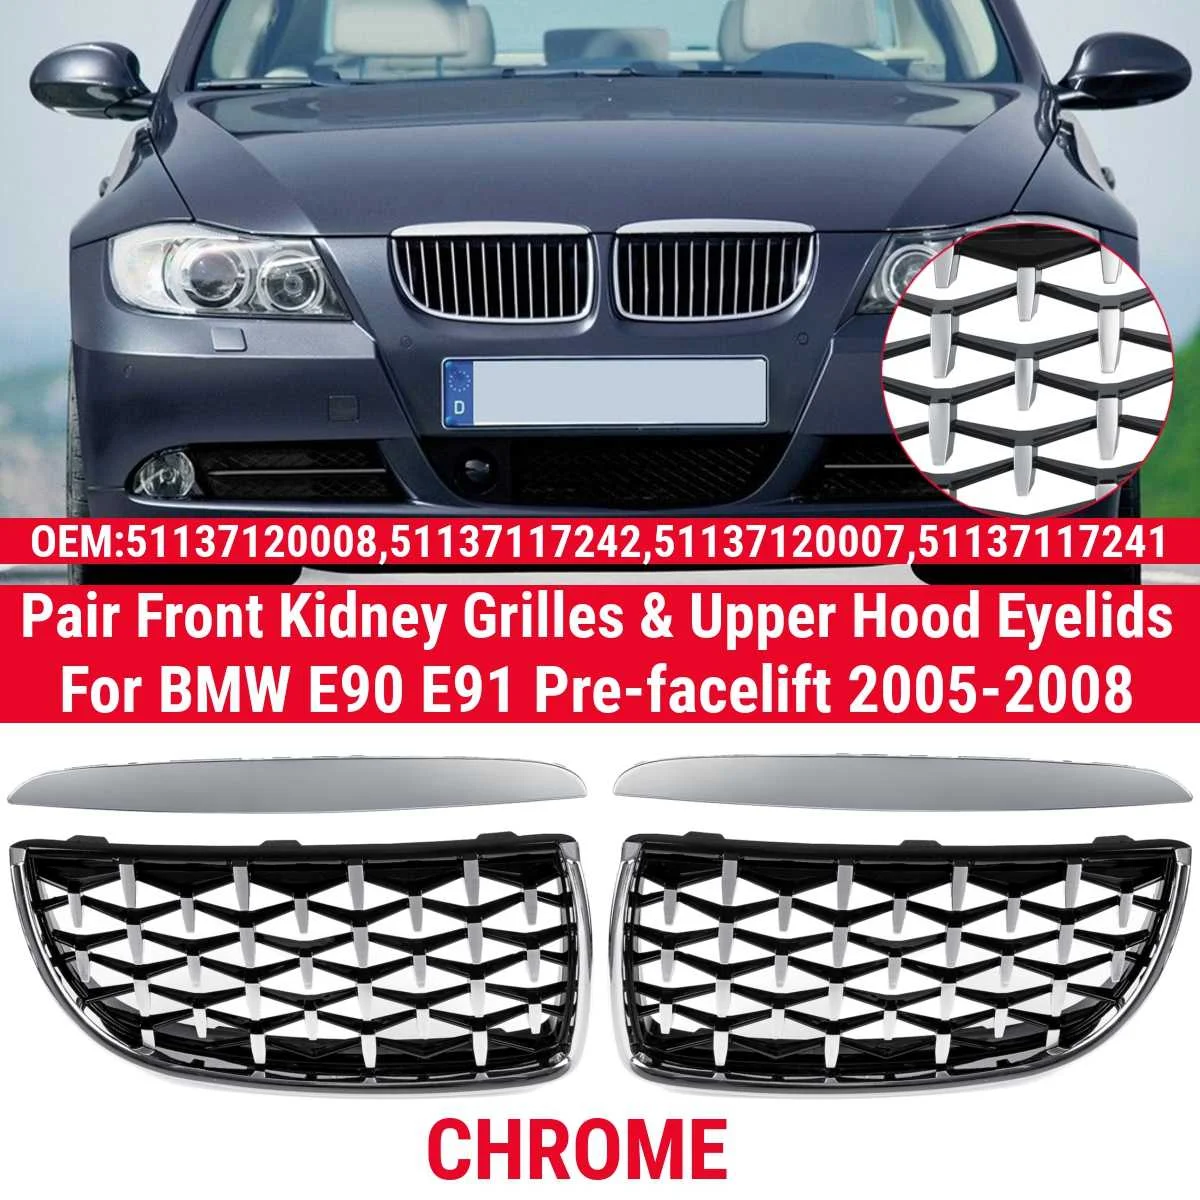 

Car Pair Diamond Style Meteor Front Hood Kidney Grilles Upper Hood Eyelids For E90 E91 2005-2008 Racing Grills 3 Series